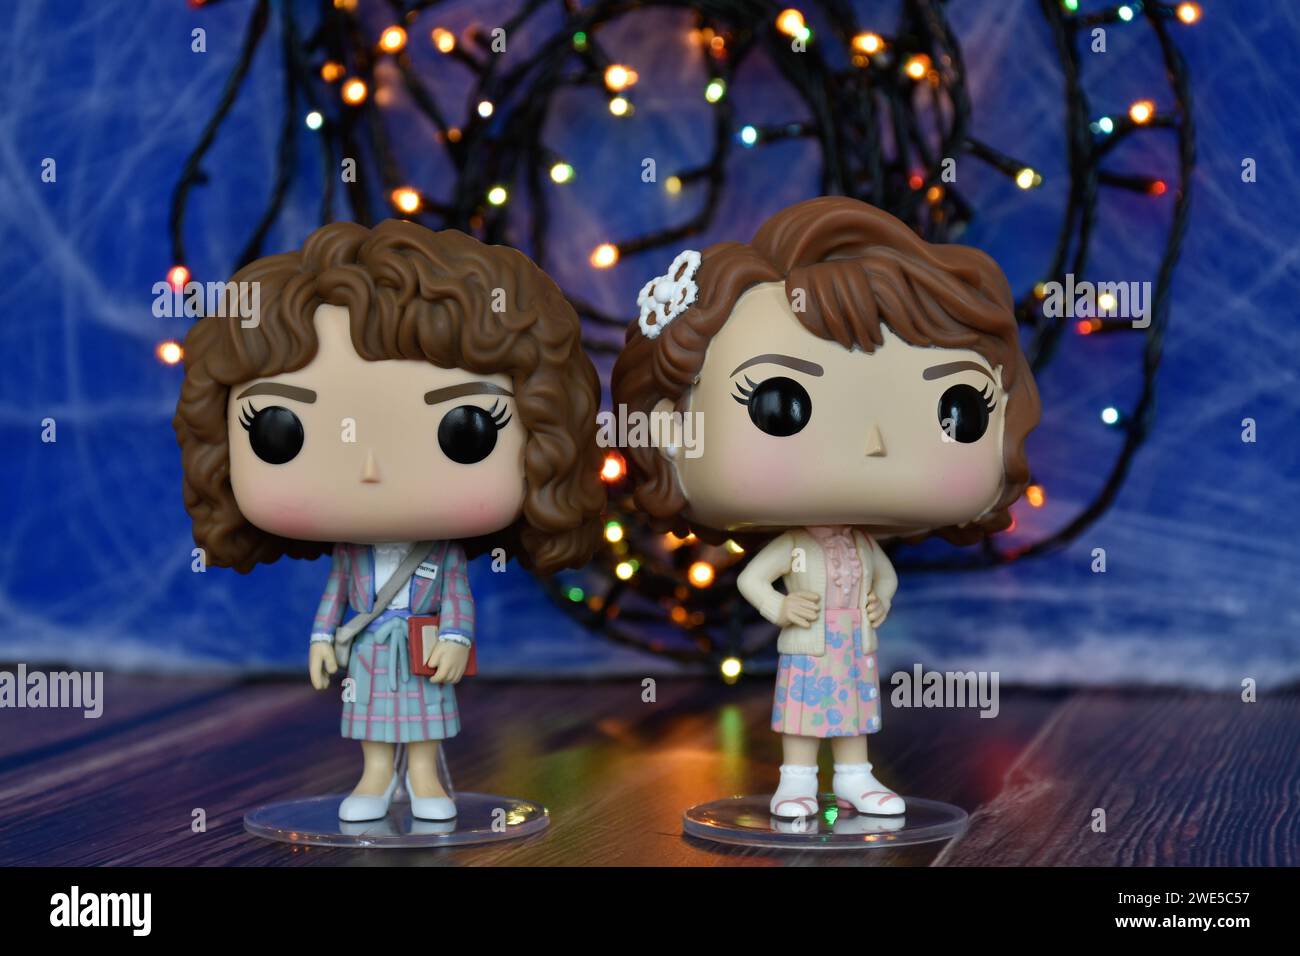 Funko Pop action figures of Nancy and Robin as academics from Netflix TV series Stranger Things. Blue foggy background, colorful lights, mysterious. Stock Photo